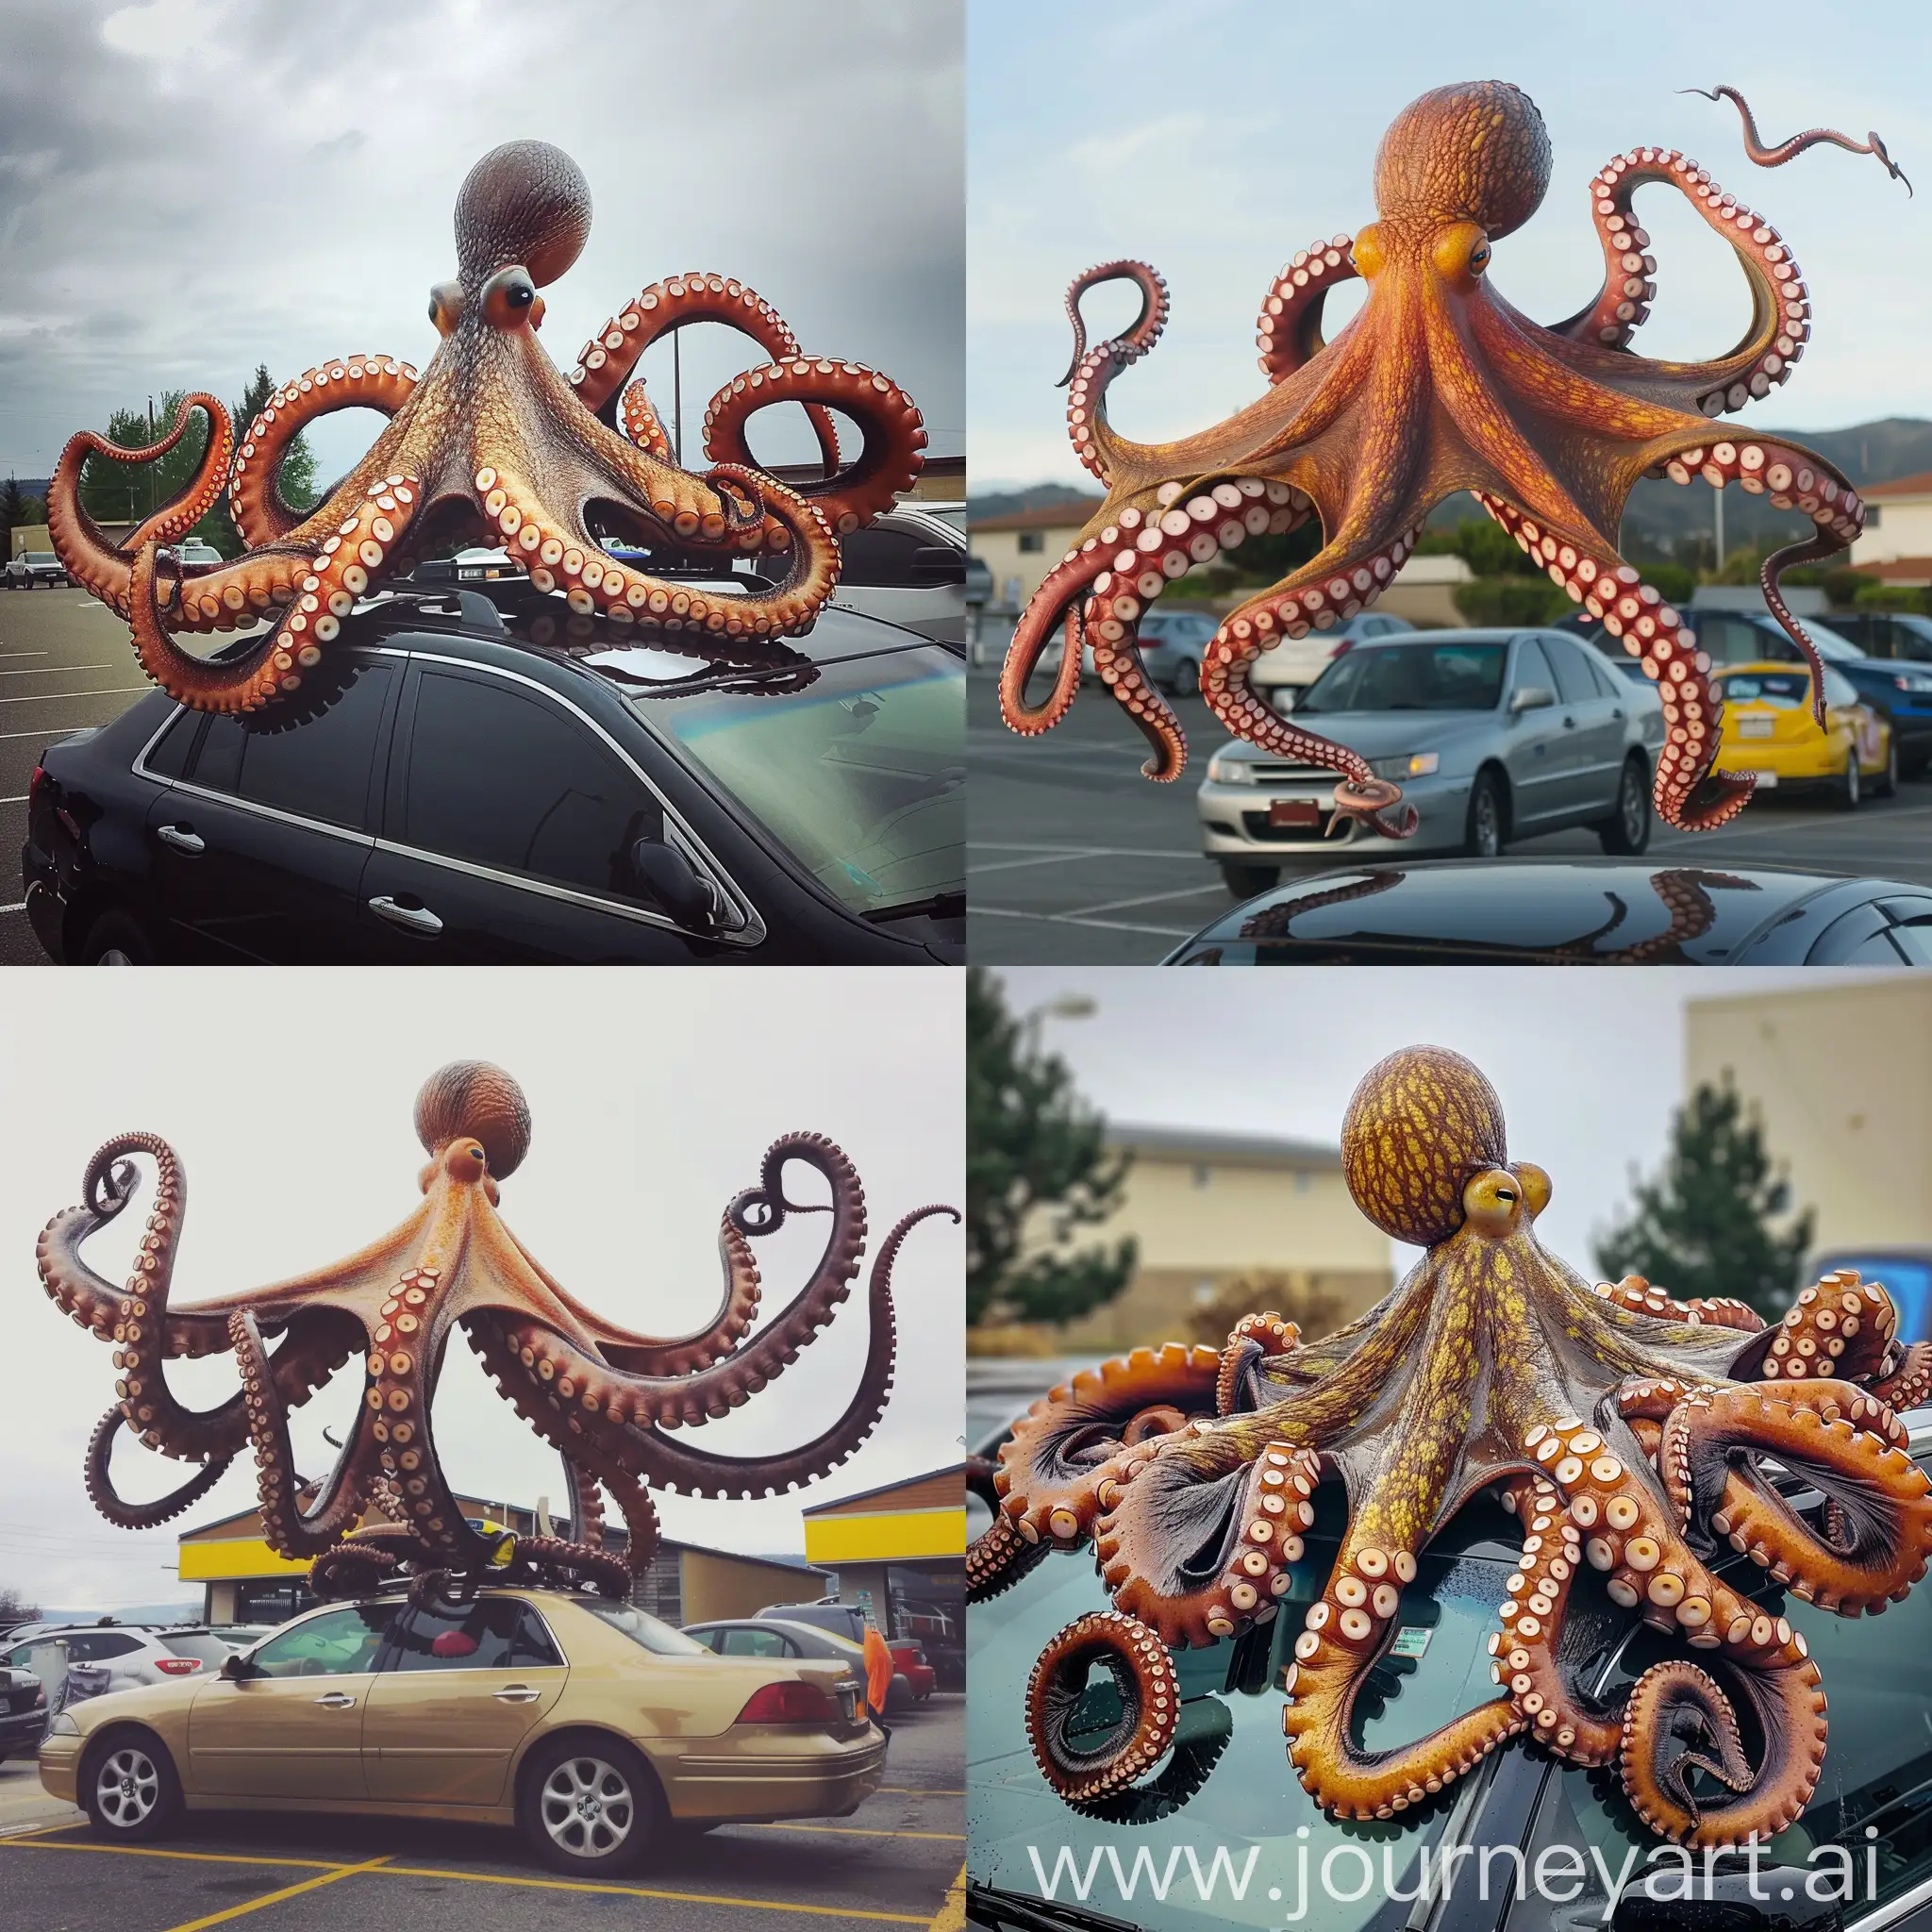 Enormous-Octopus-atop-Car-Mysterious-Encounter-in-Parking-Lot